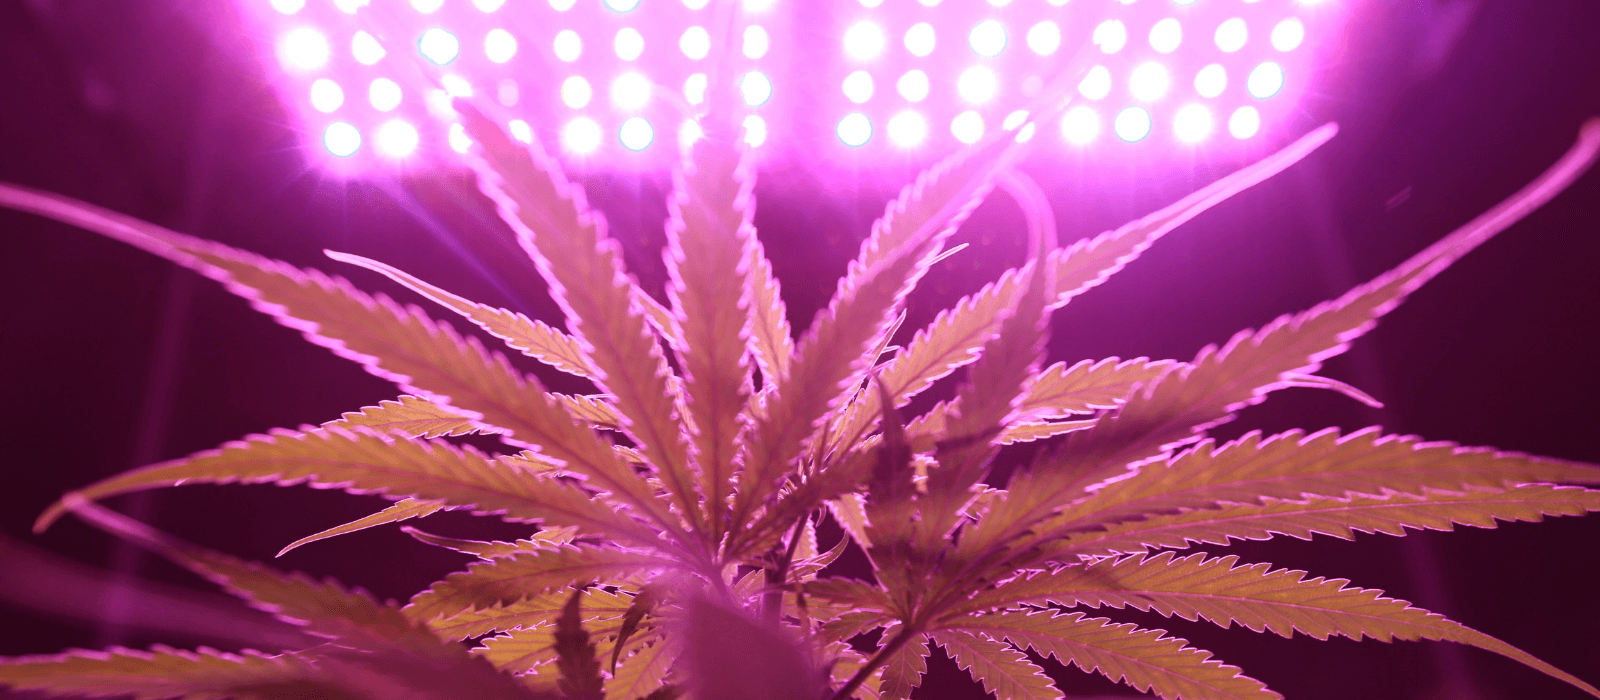 LED lights when growing their cannabis